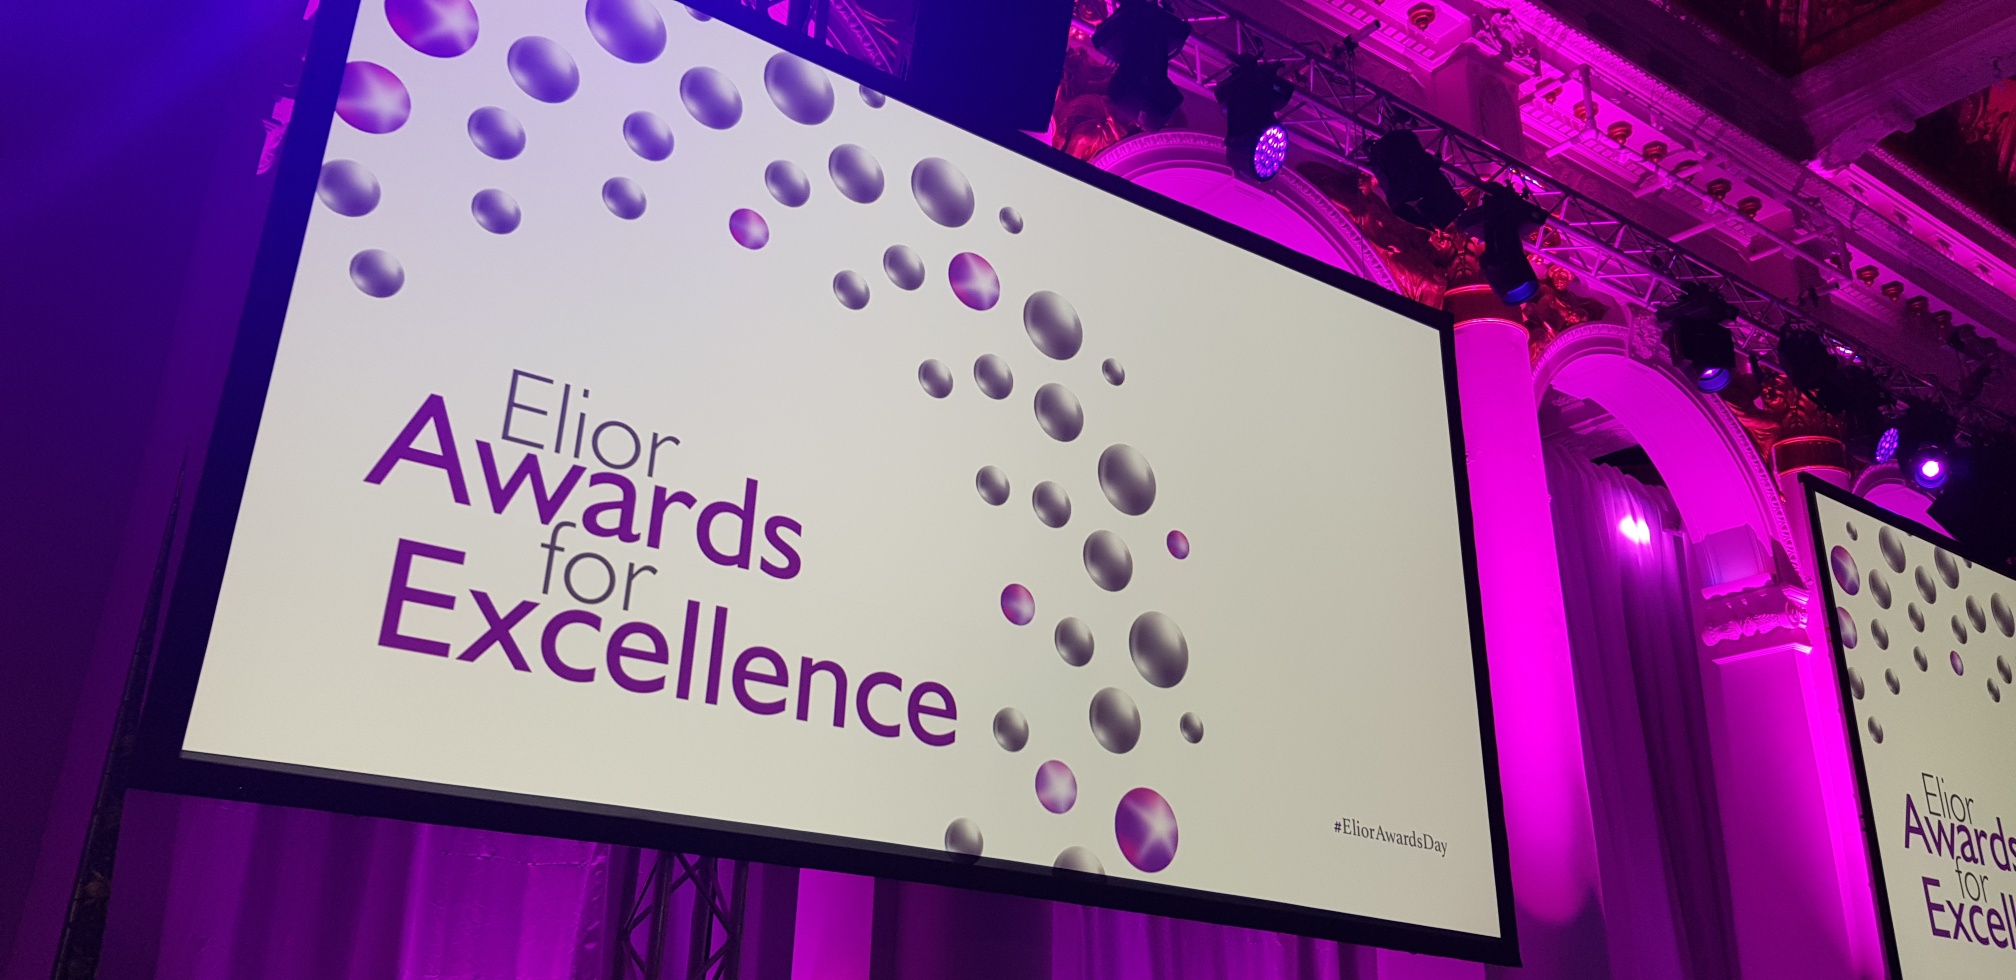 Image of the big screens showing the Elior Awards for Excellence logo